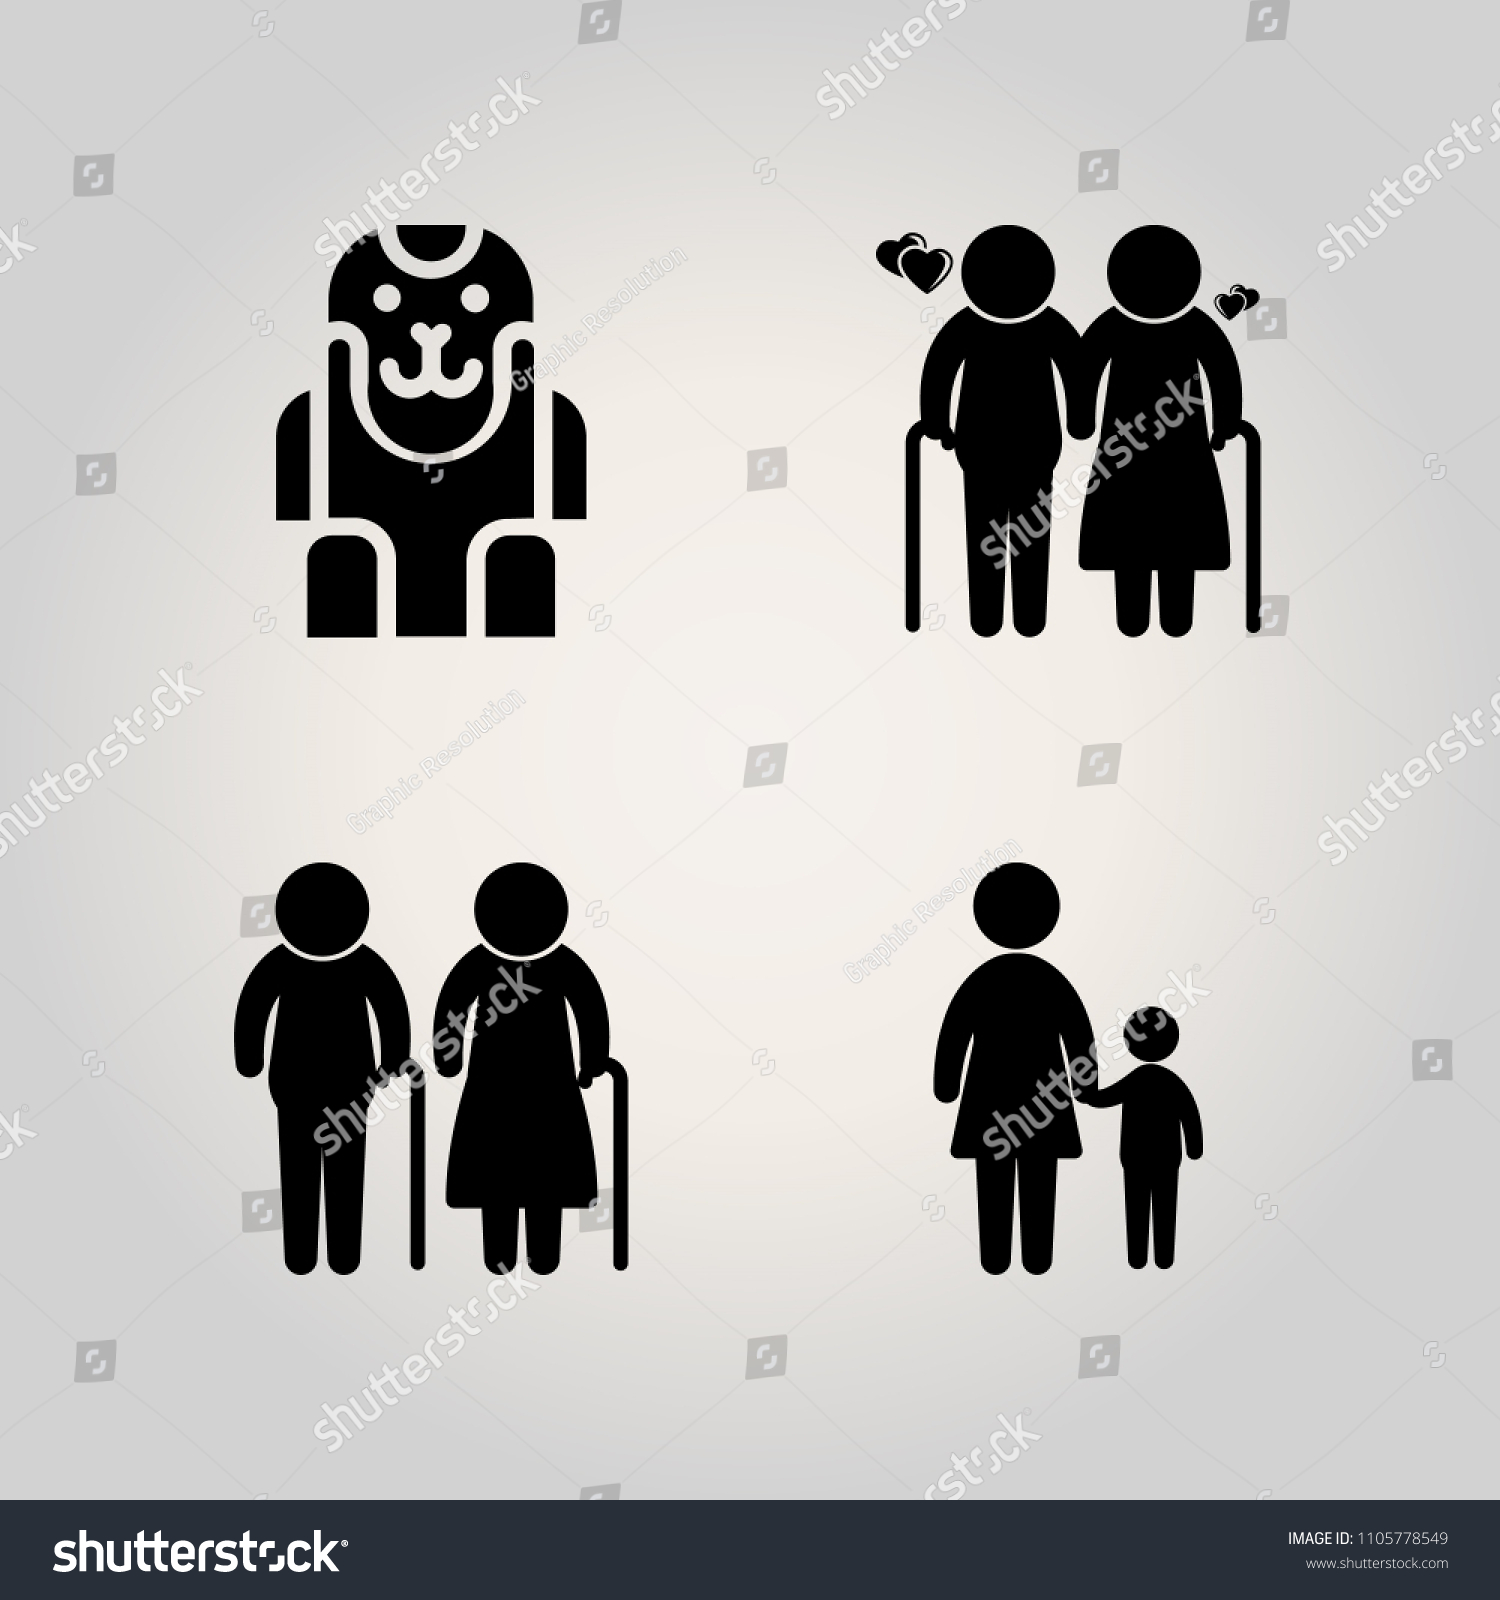 SVG of Family icon set. healthy, leisure, aging and cro-magnon illustration vector icons for web and design svg